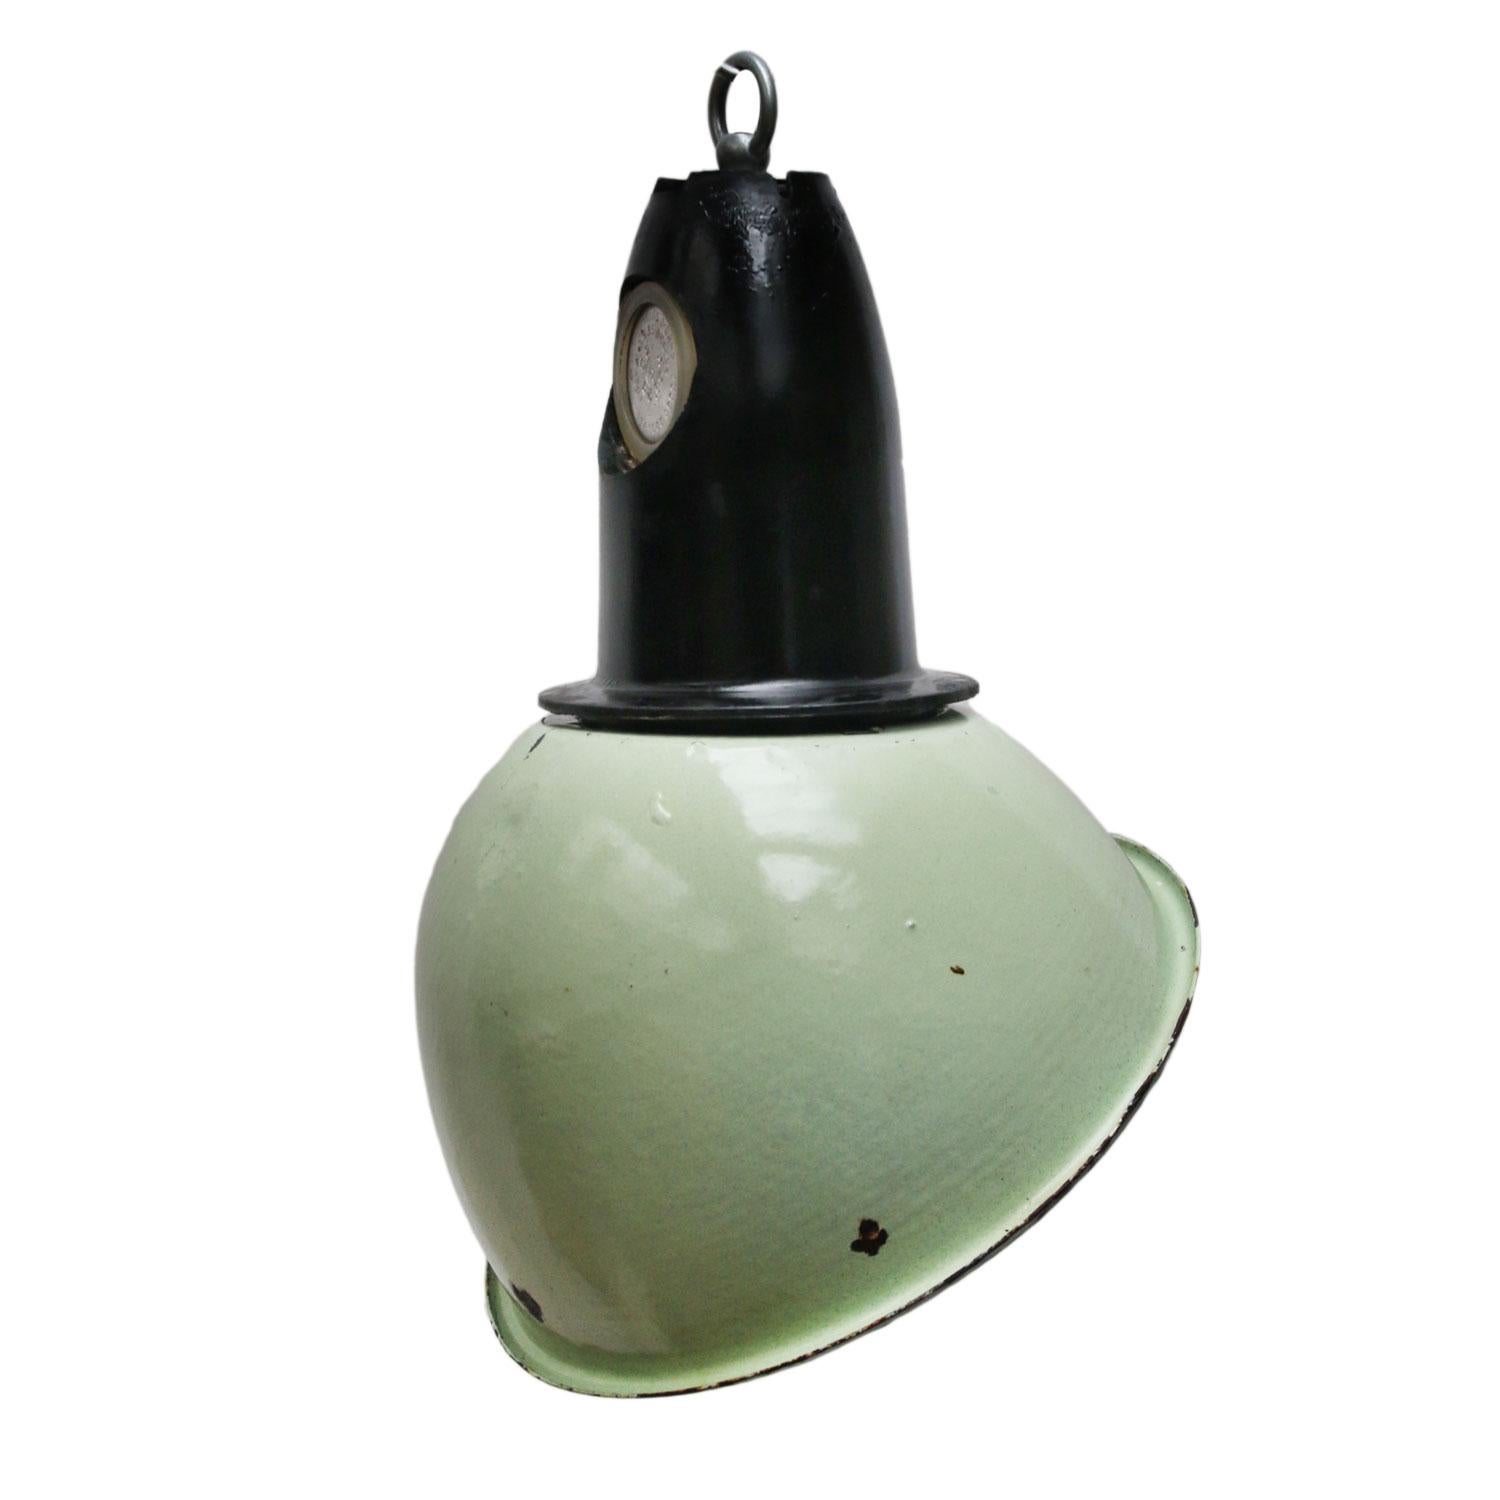 Asymmetrical industrial lamp made of green enamel with Bakelite top.
White interior. 

Weight 1.35 kg / 3 lb

Priced per individual item. All lamps have been made suitable by international standards for incandescent light bulbs,